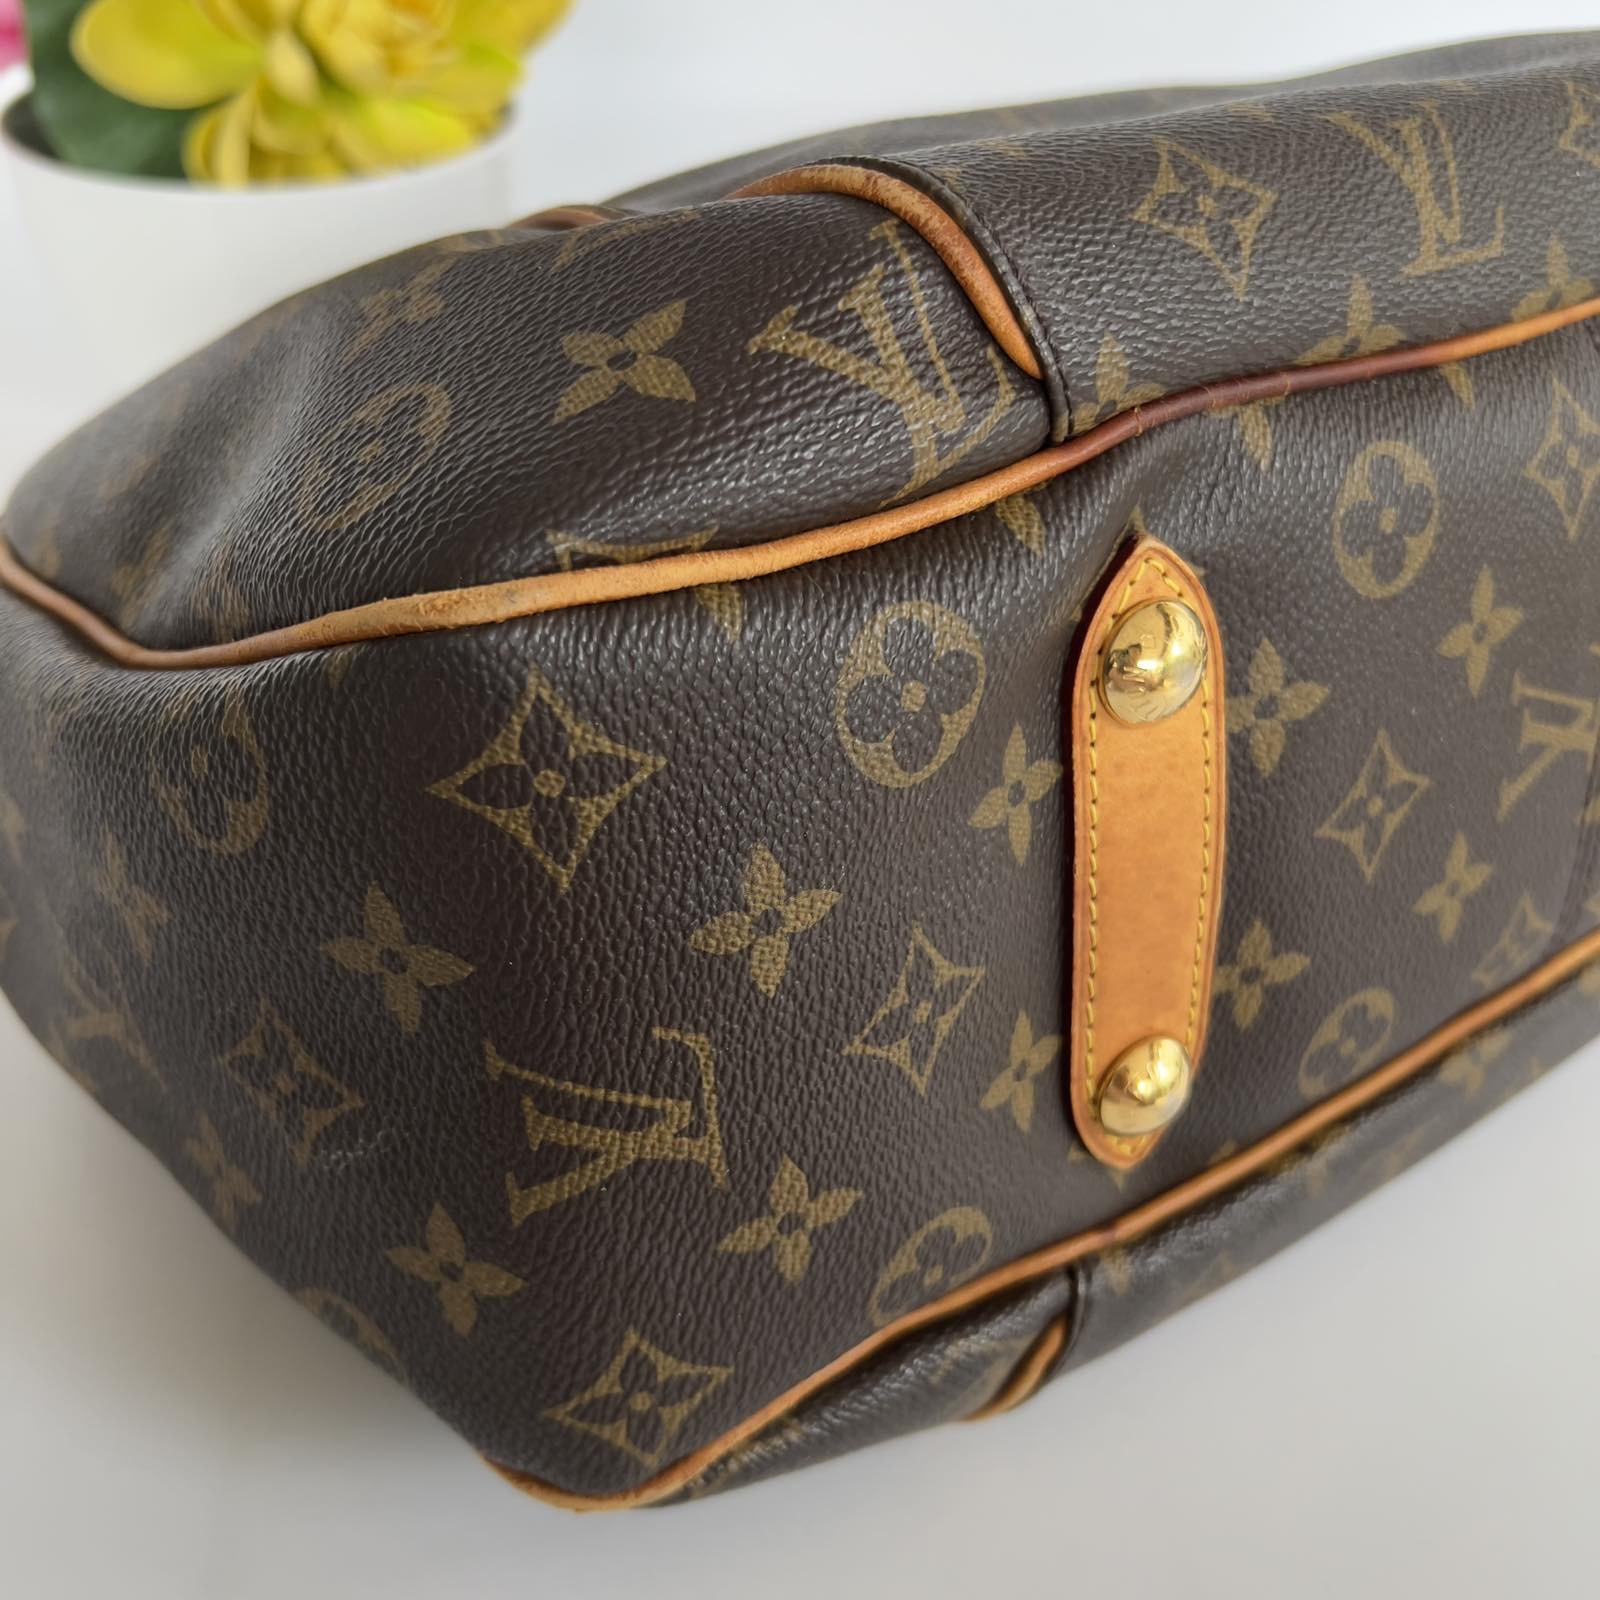 Authentic Louis Vuitton Monogram Canvas Delightful PM Handbag  Article:M50154 Made in France, Accessorising - Brand Name / Designer  Handbags For Carry & Wear…